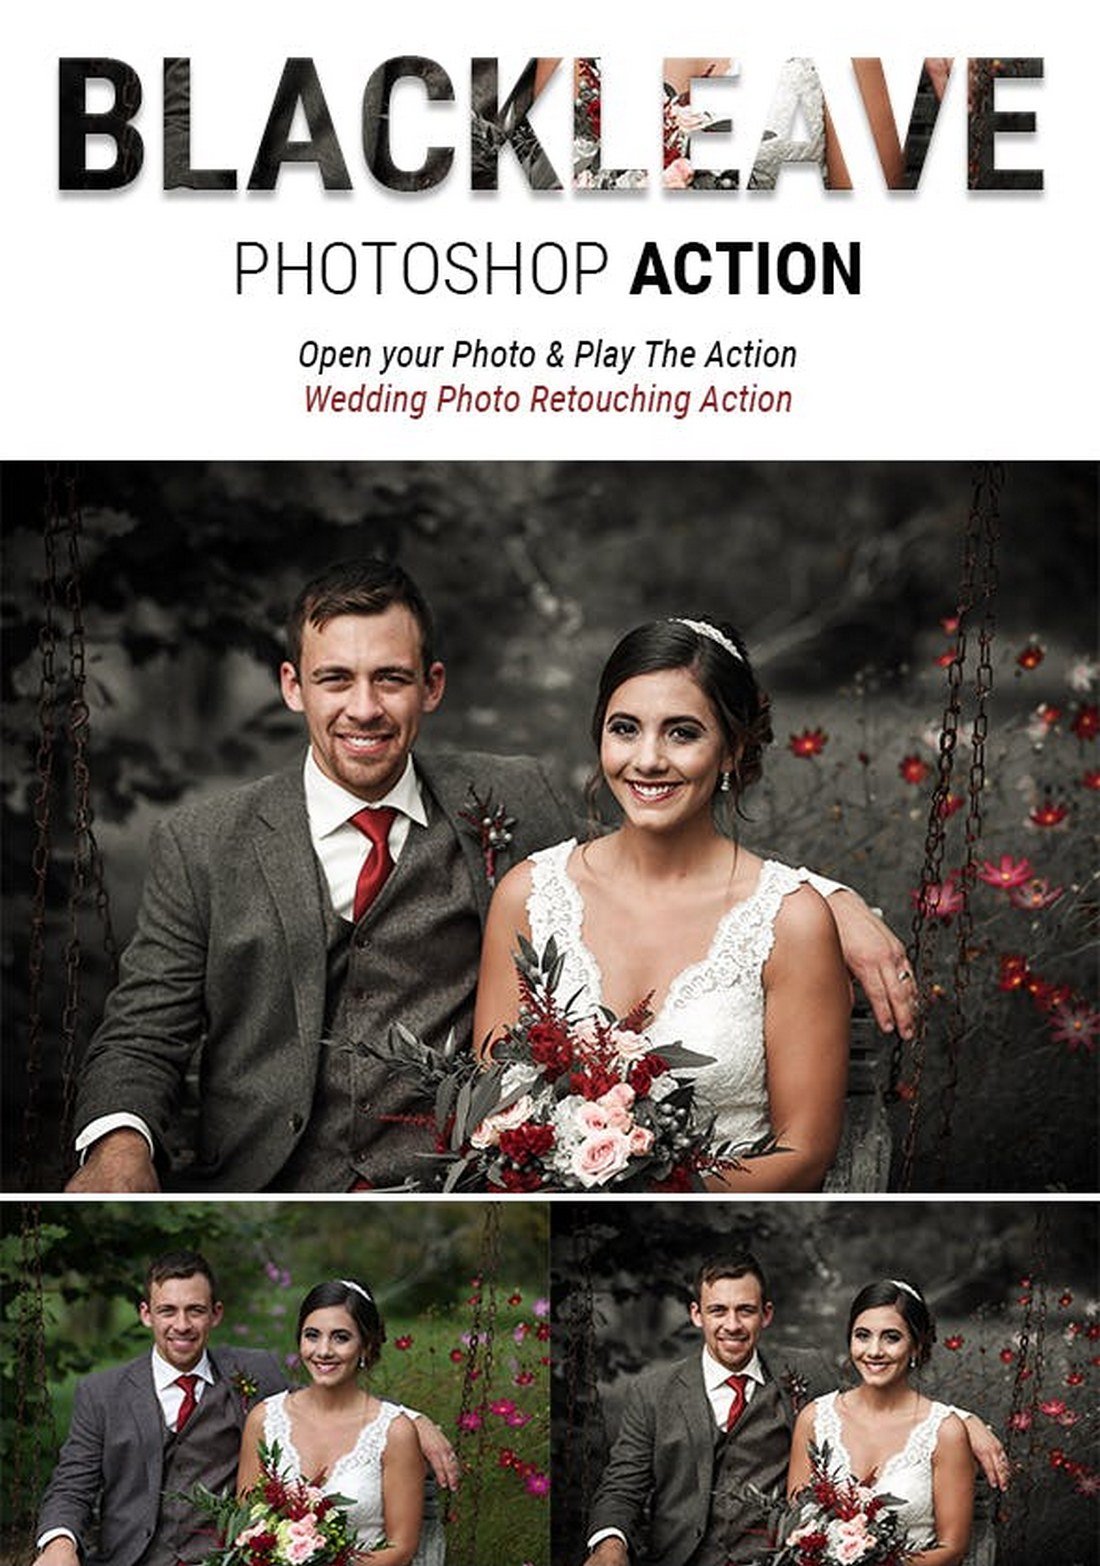 BLACK LEAVE - Special Effects Wedding Photoshop Action